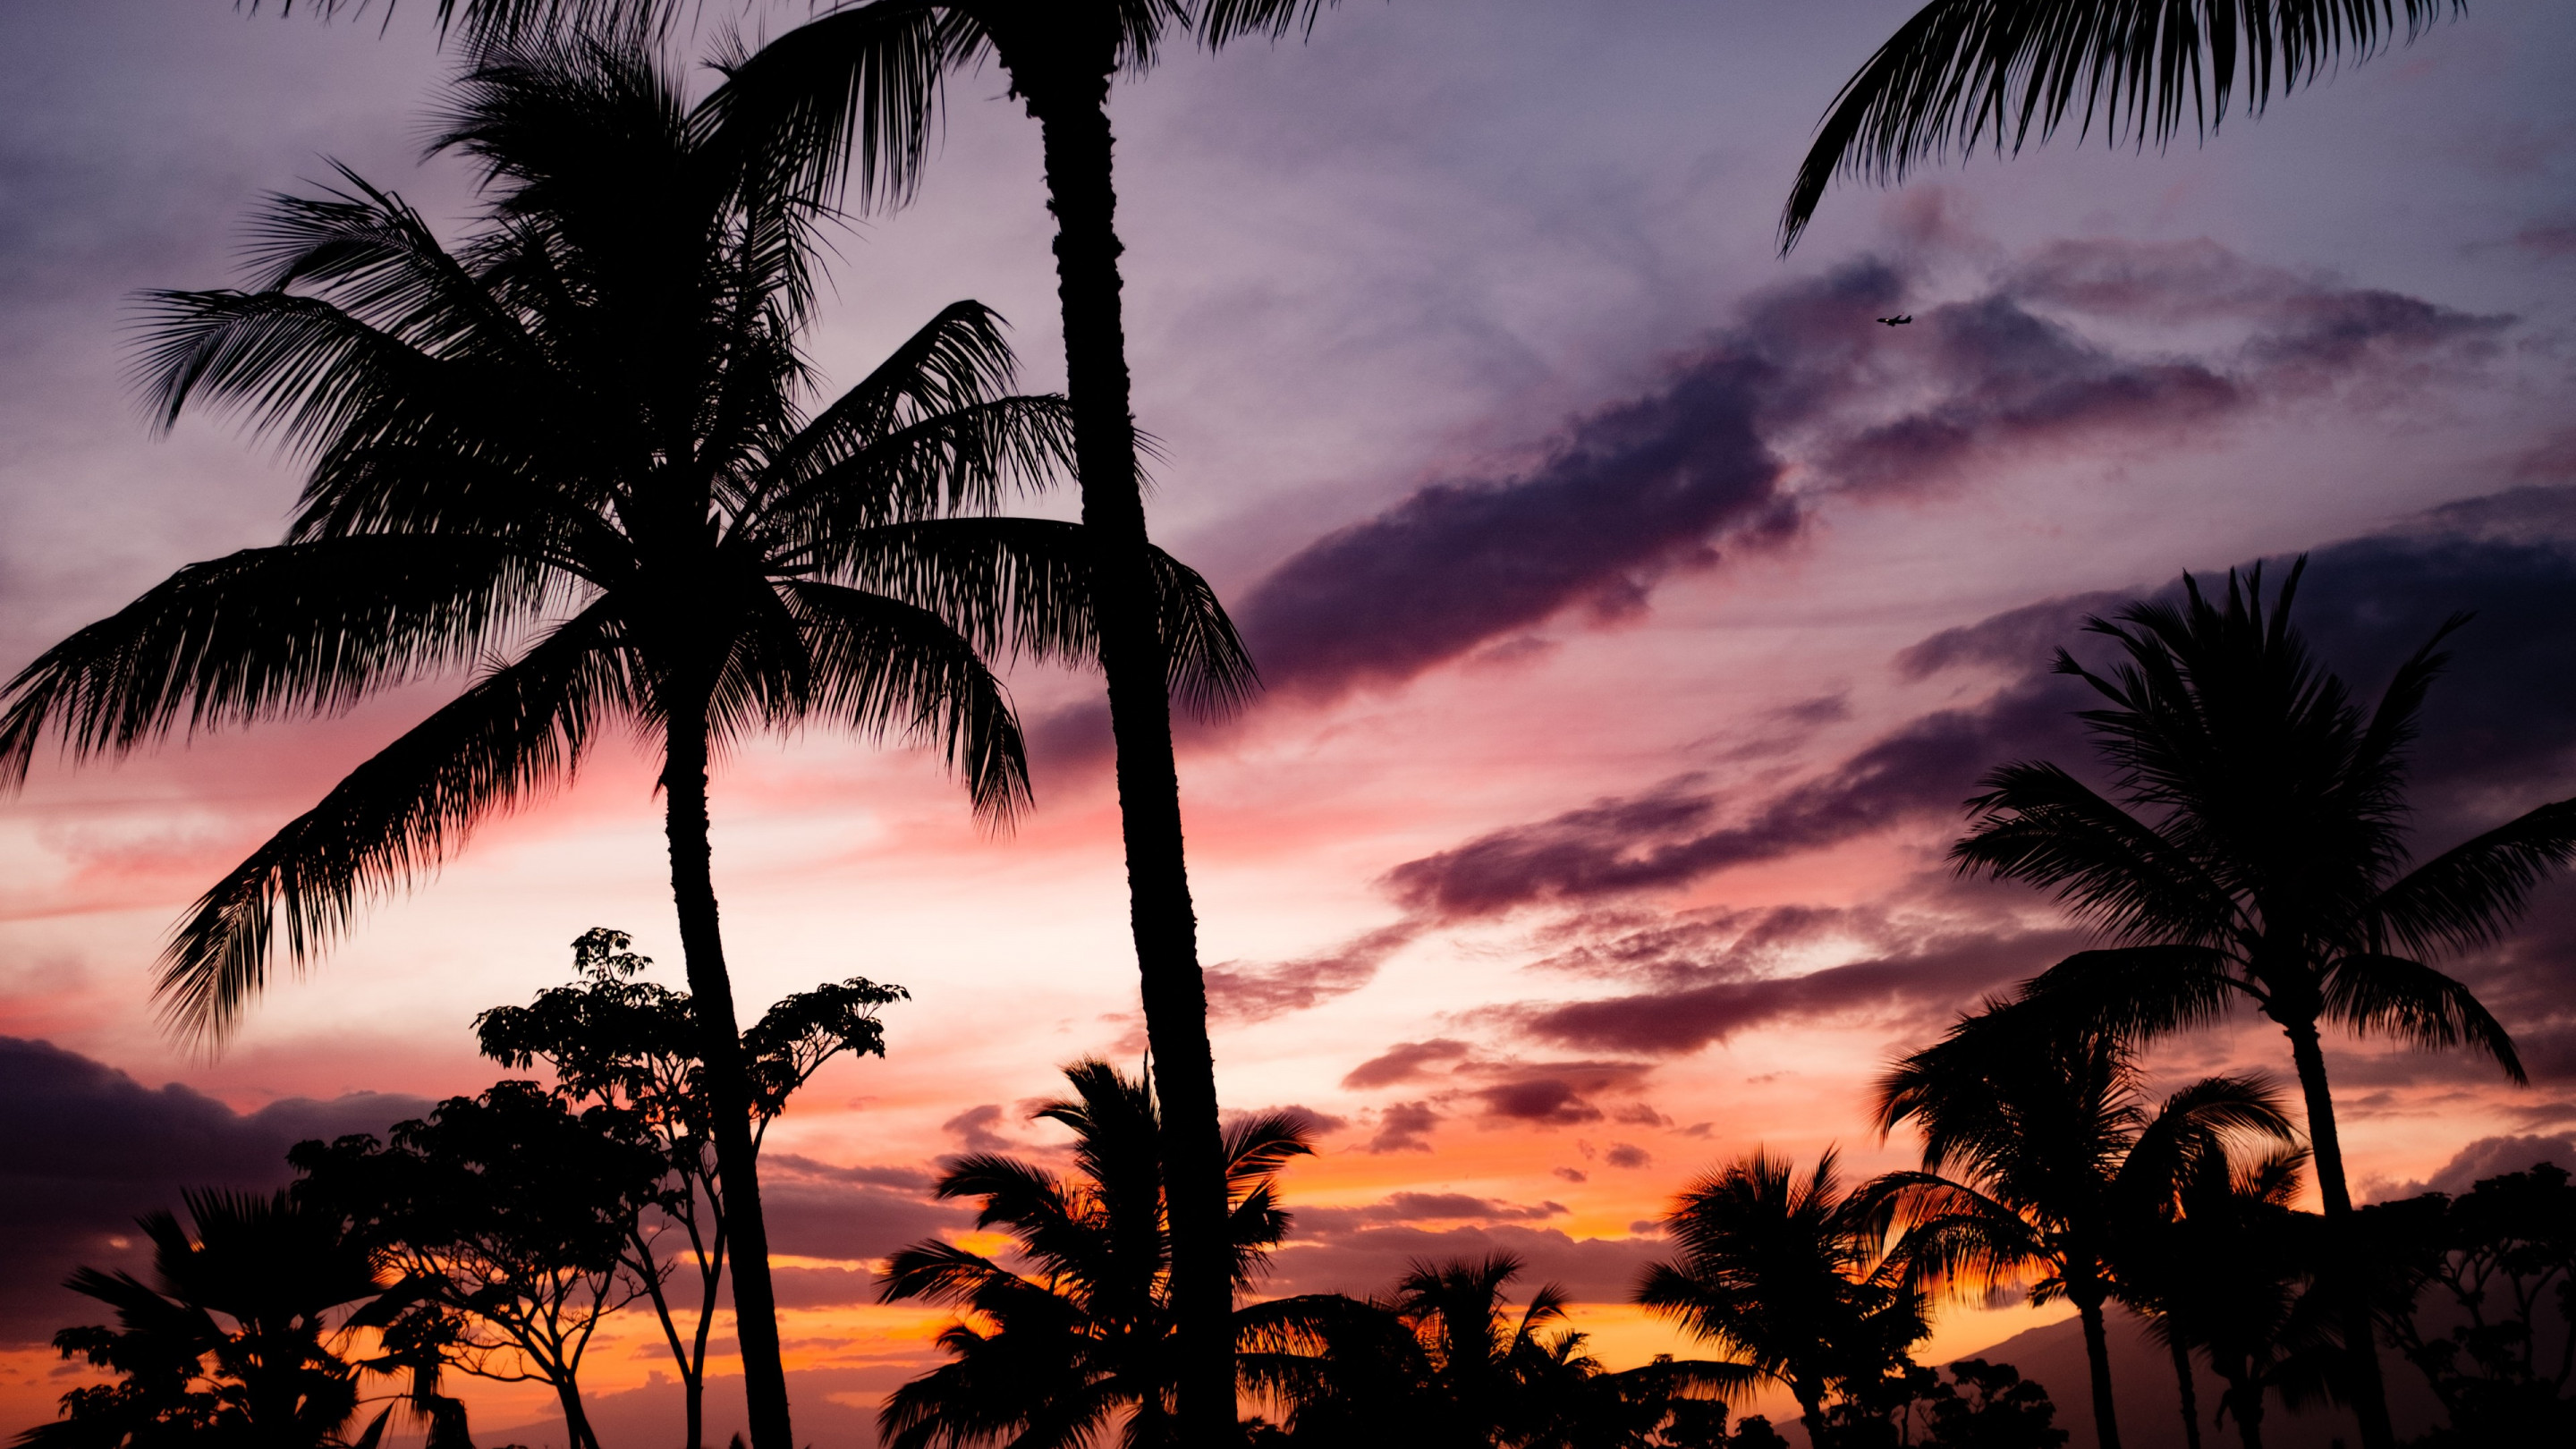 Tropical view with palm trees wallpaper 2880x1620